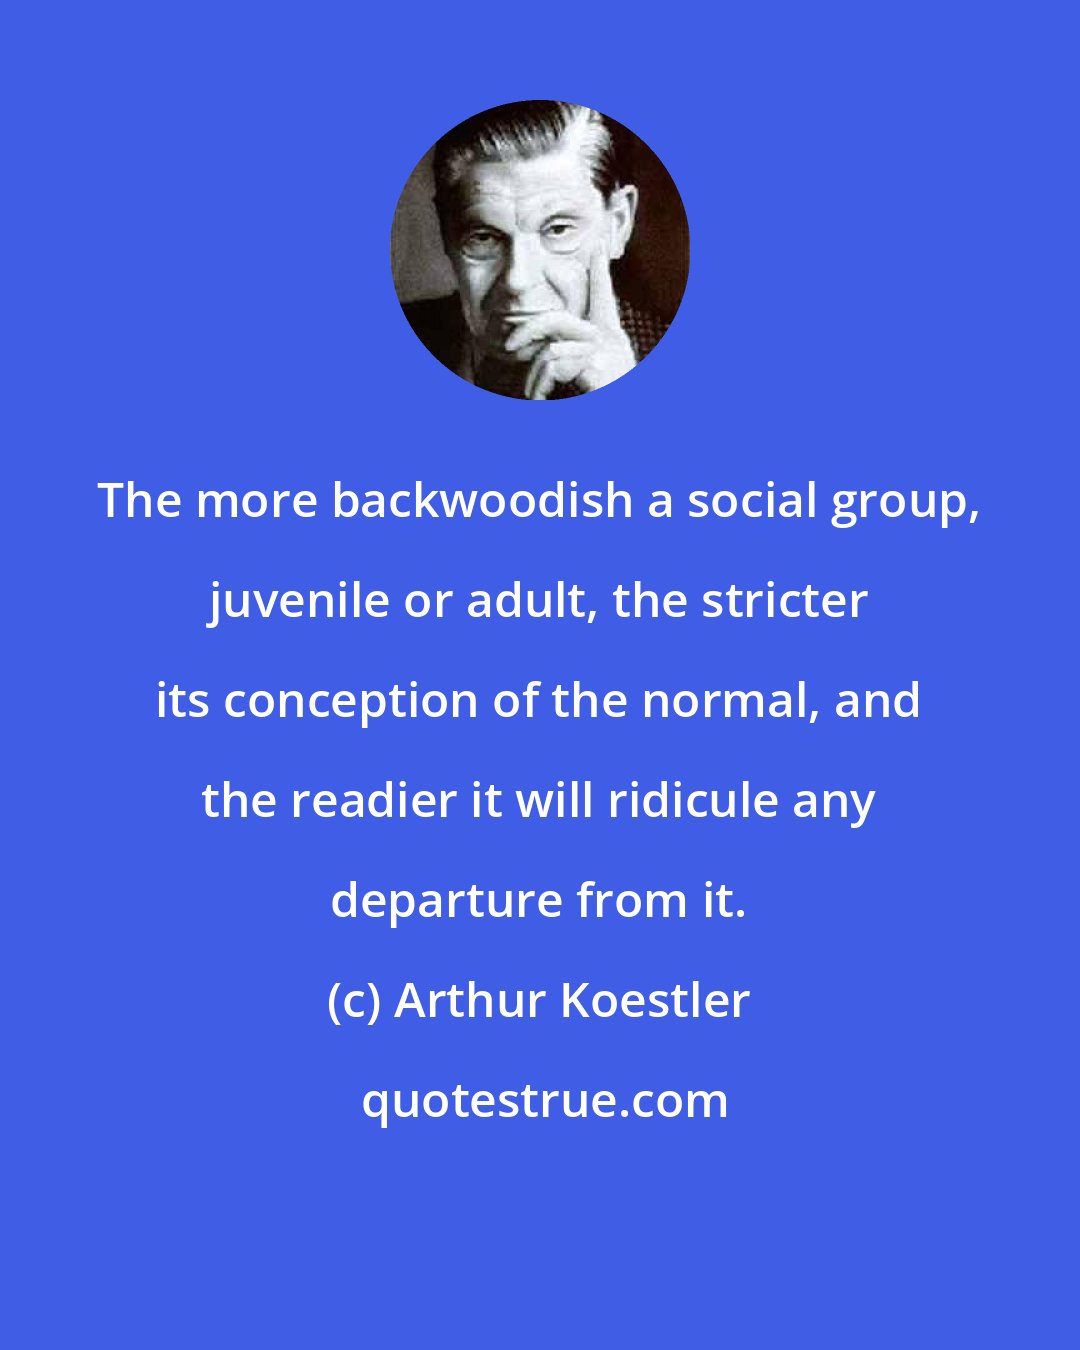 Arthur Koestler: The more backwoodish a social group, juvenile or adult, the stricter its conception of the normal, and the readier it will ridicule any departure from it.